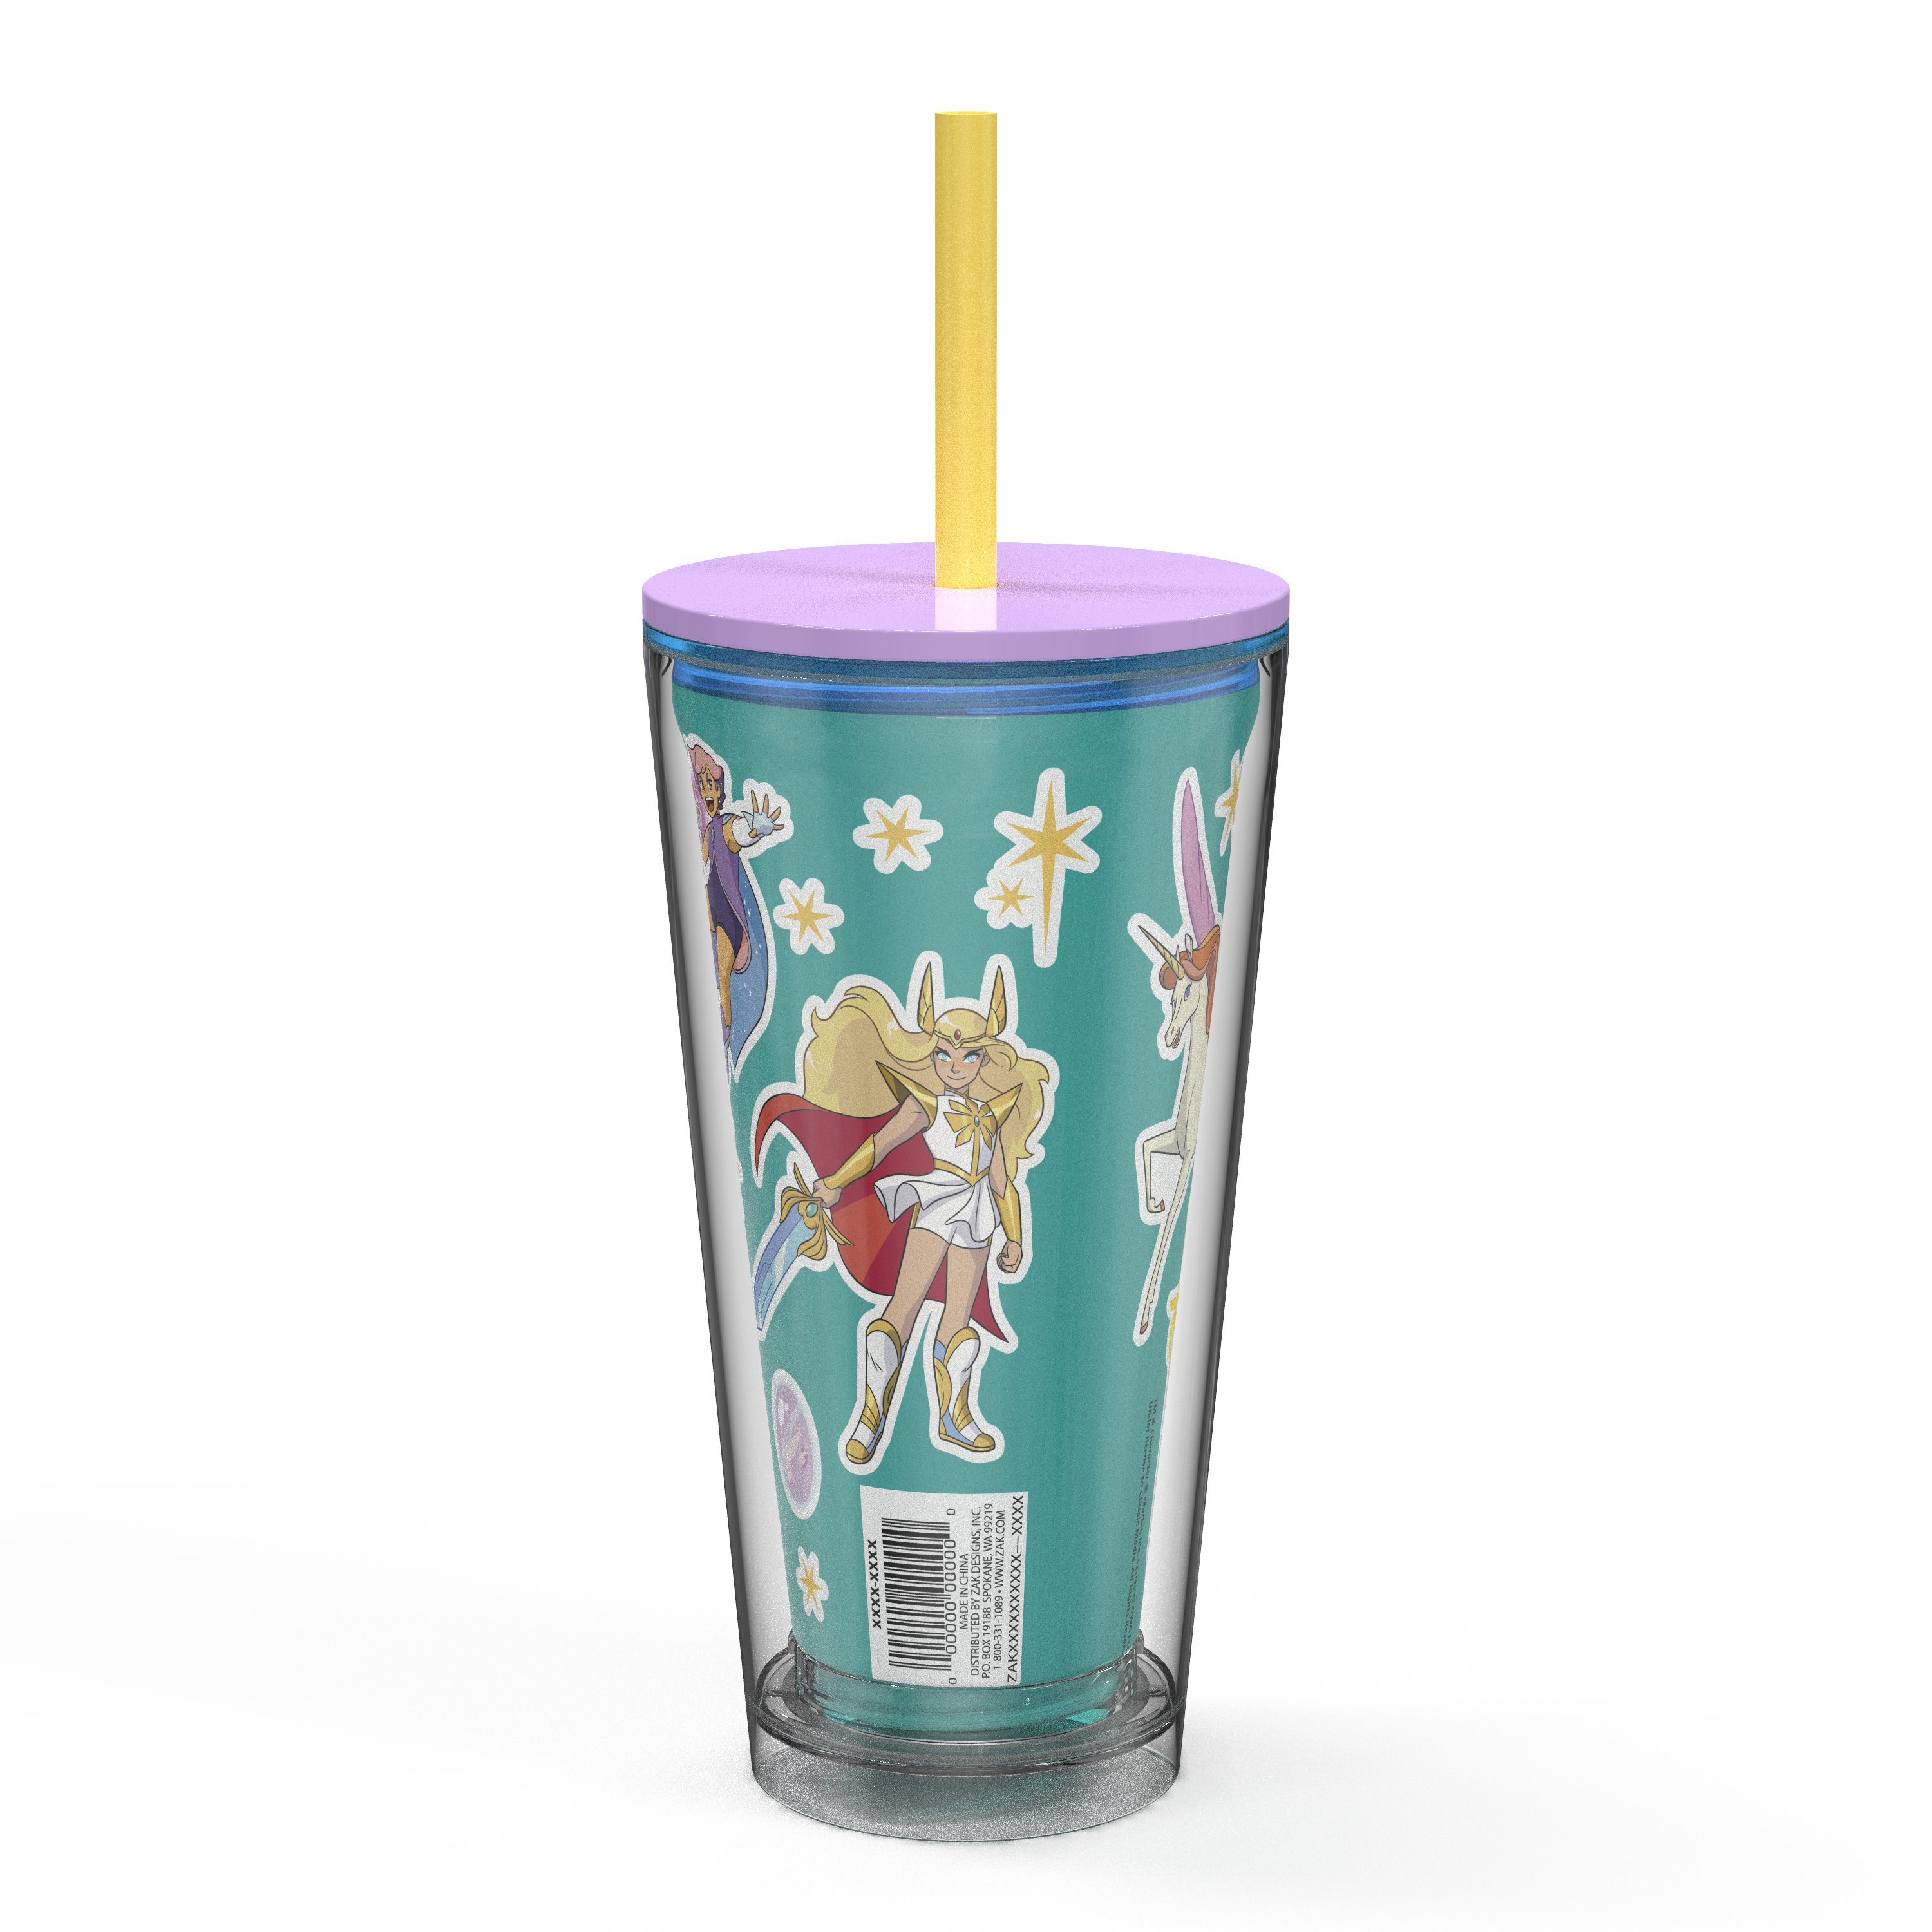 She-Ra 16 ounce Plastic Cup with Lid and Straw, Princess of Power slideshow image 4